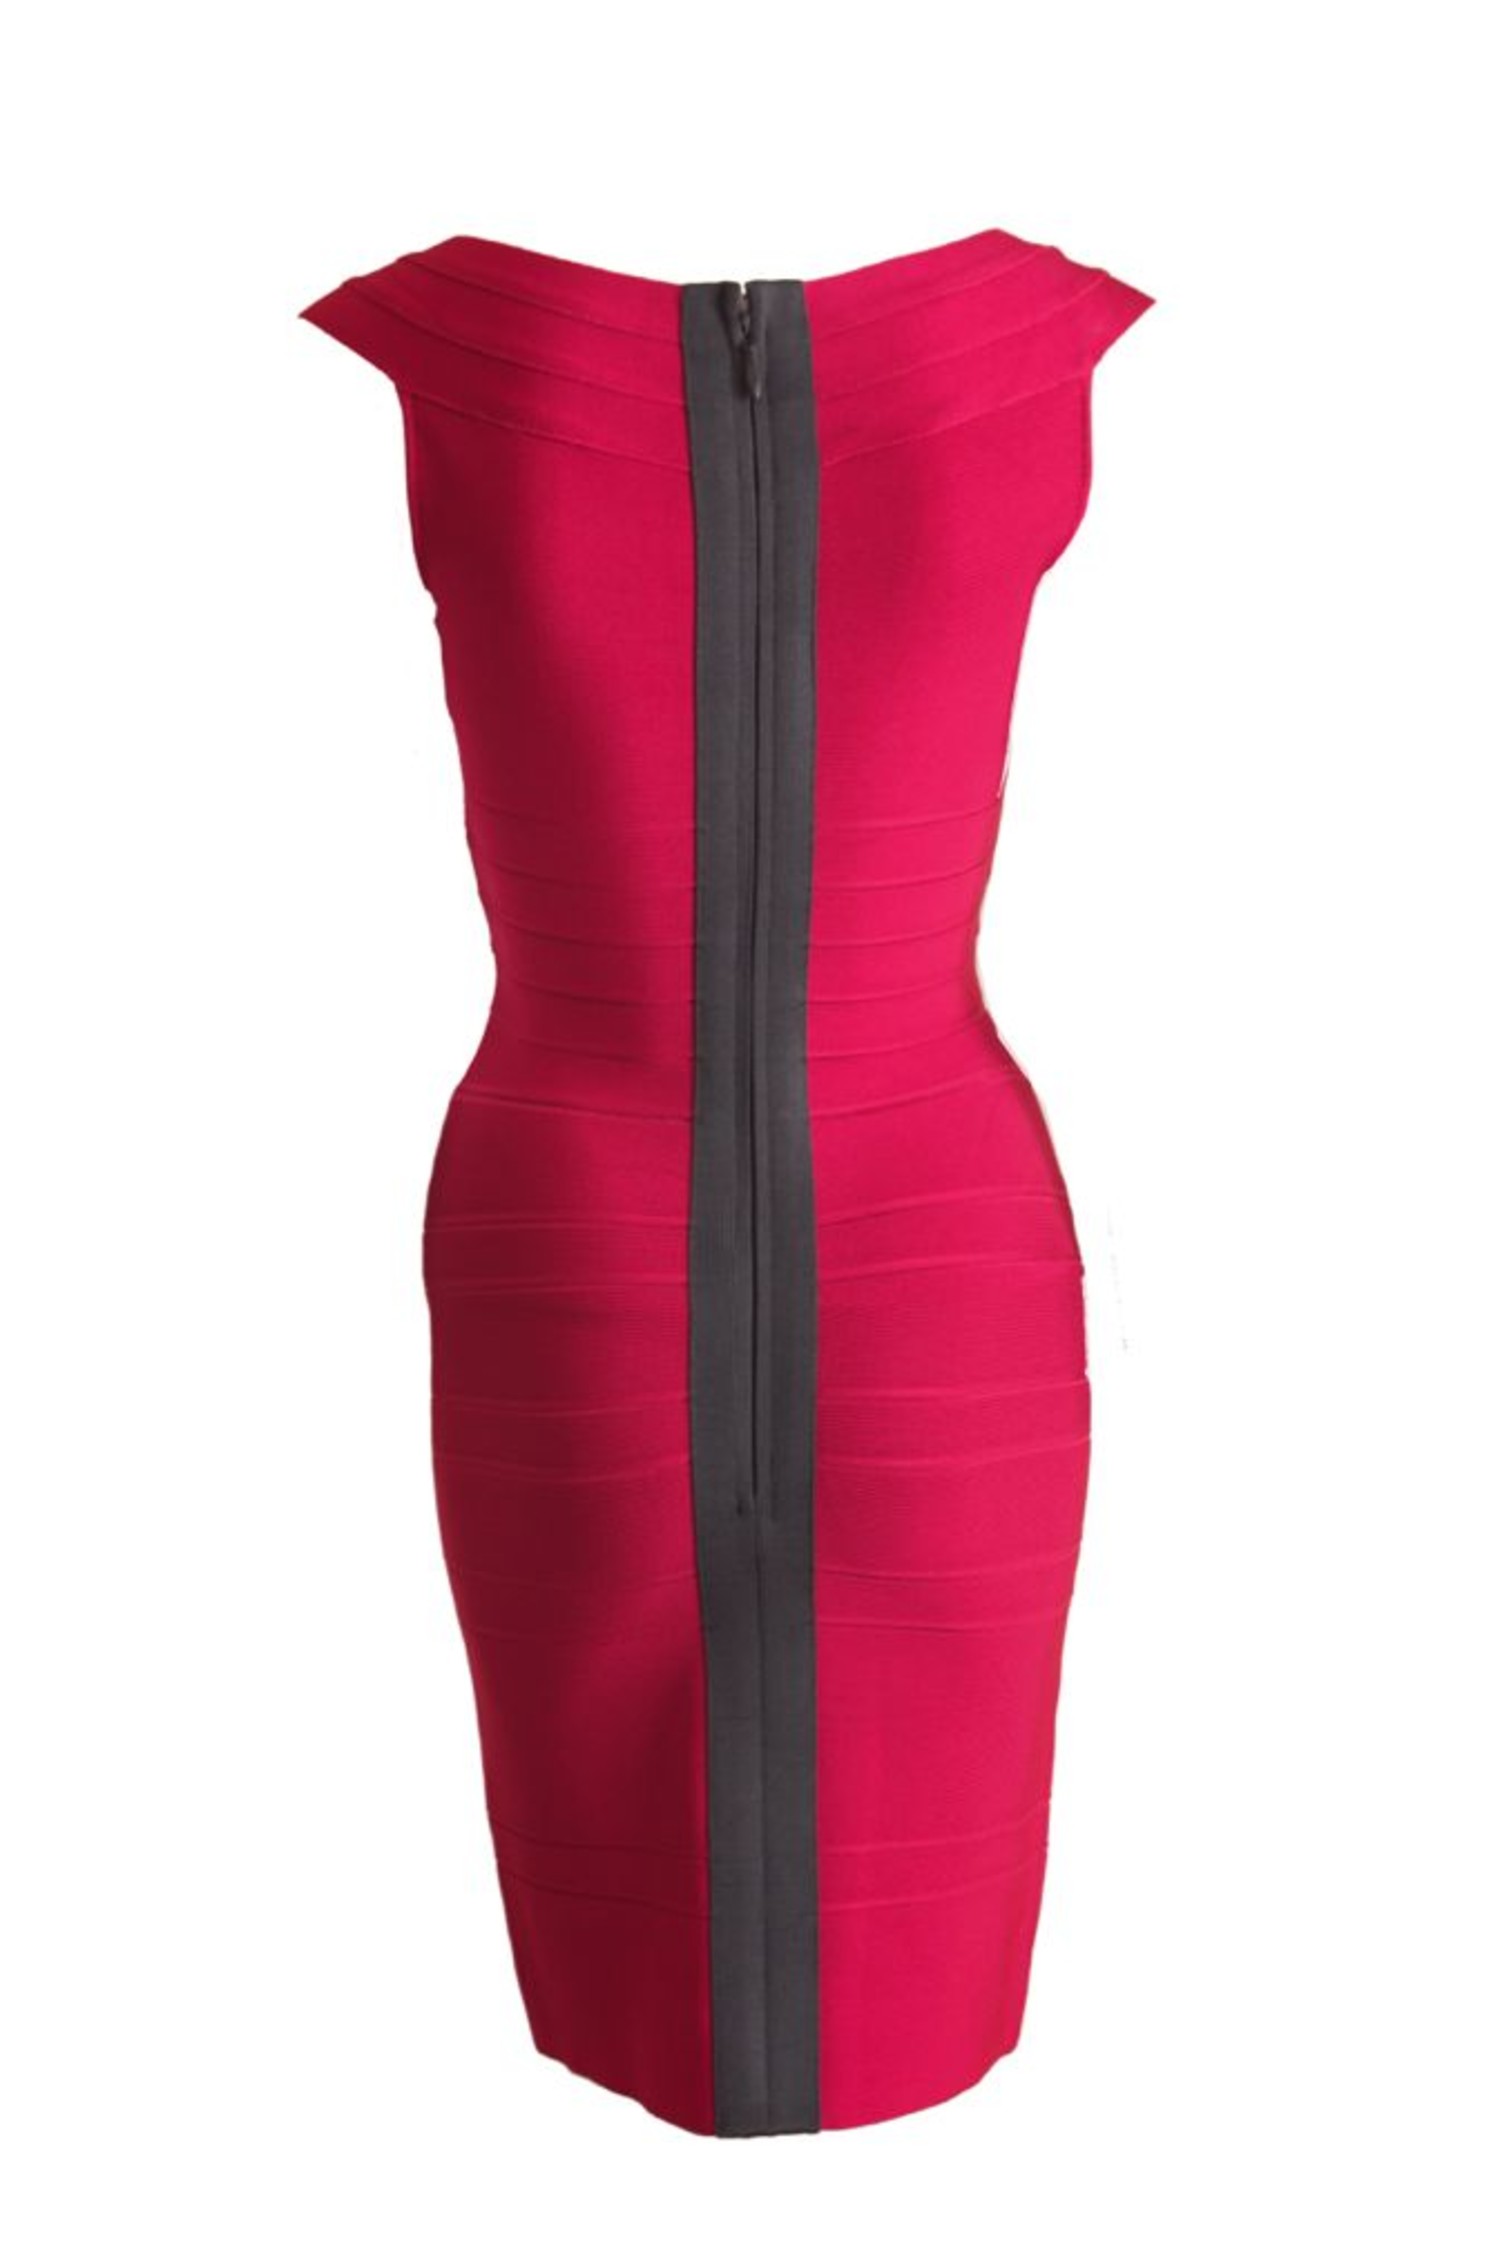 Herve Leger Red Square Neck Cap Sleeves Bandage Dress, Women's Fashion,  Tops, Sleeveless on Carousell